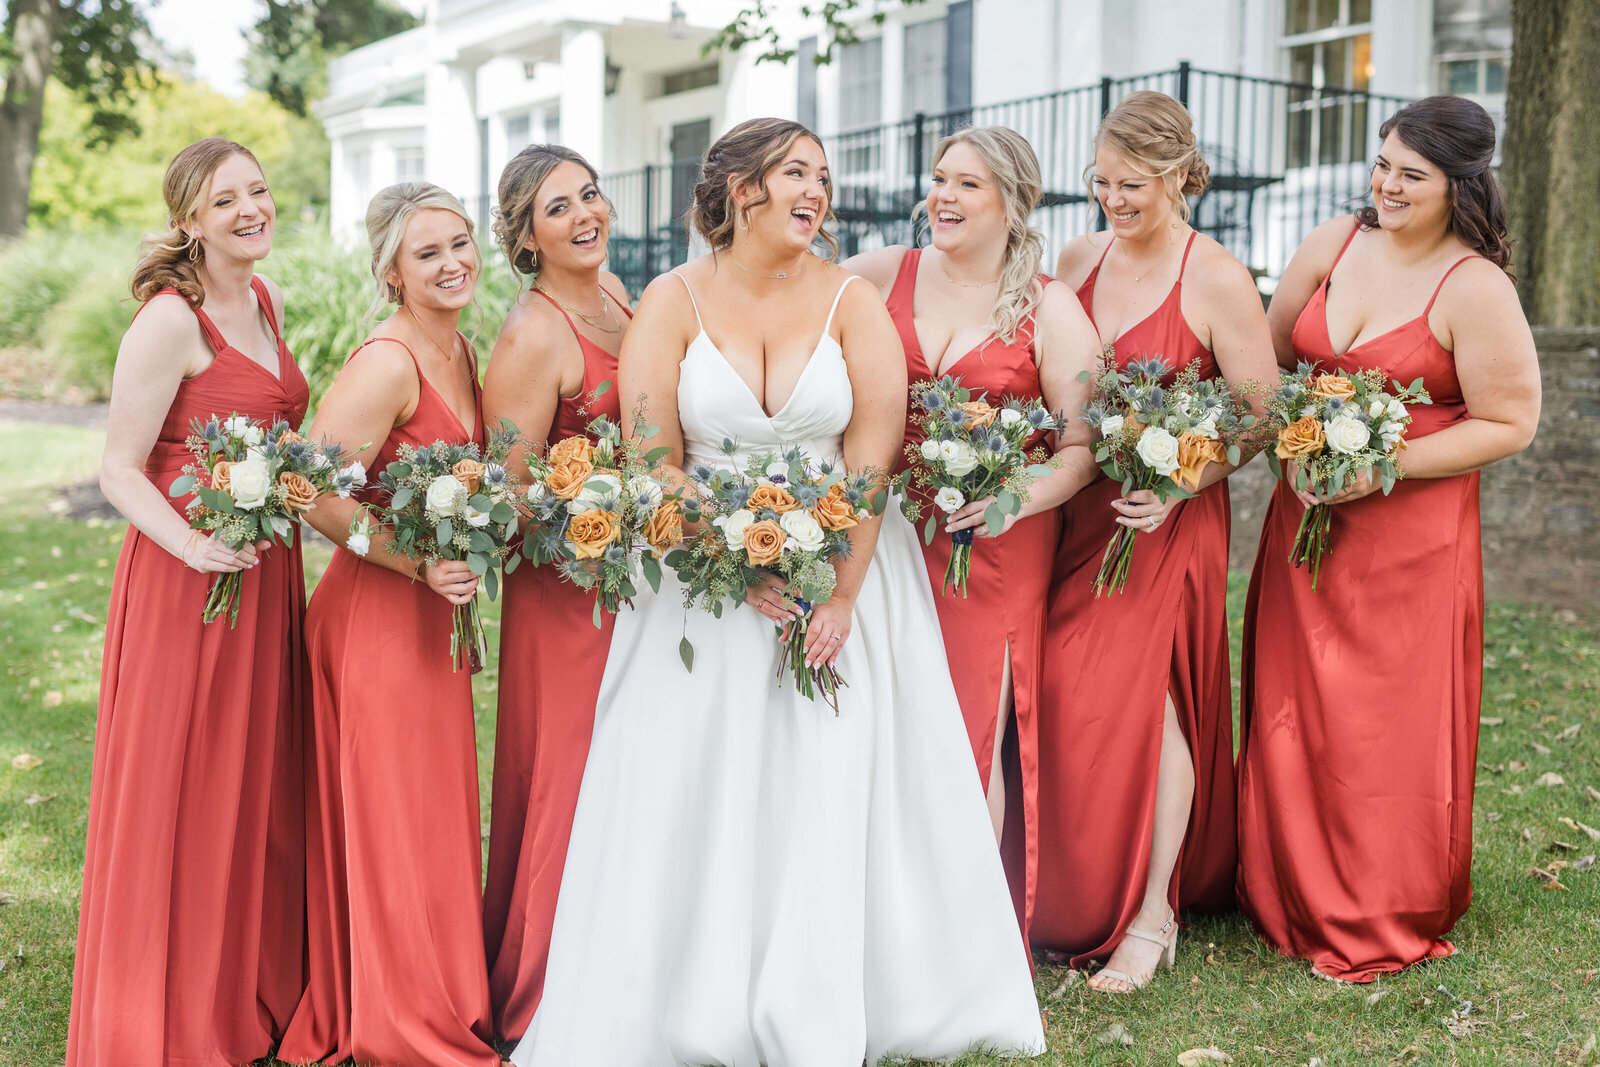 Bride and bridesmaids in orange dresses holding bouquets and laughing. At venue Walden Ponds.